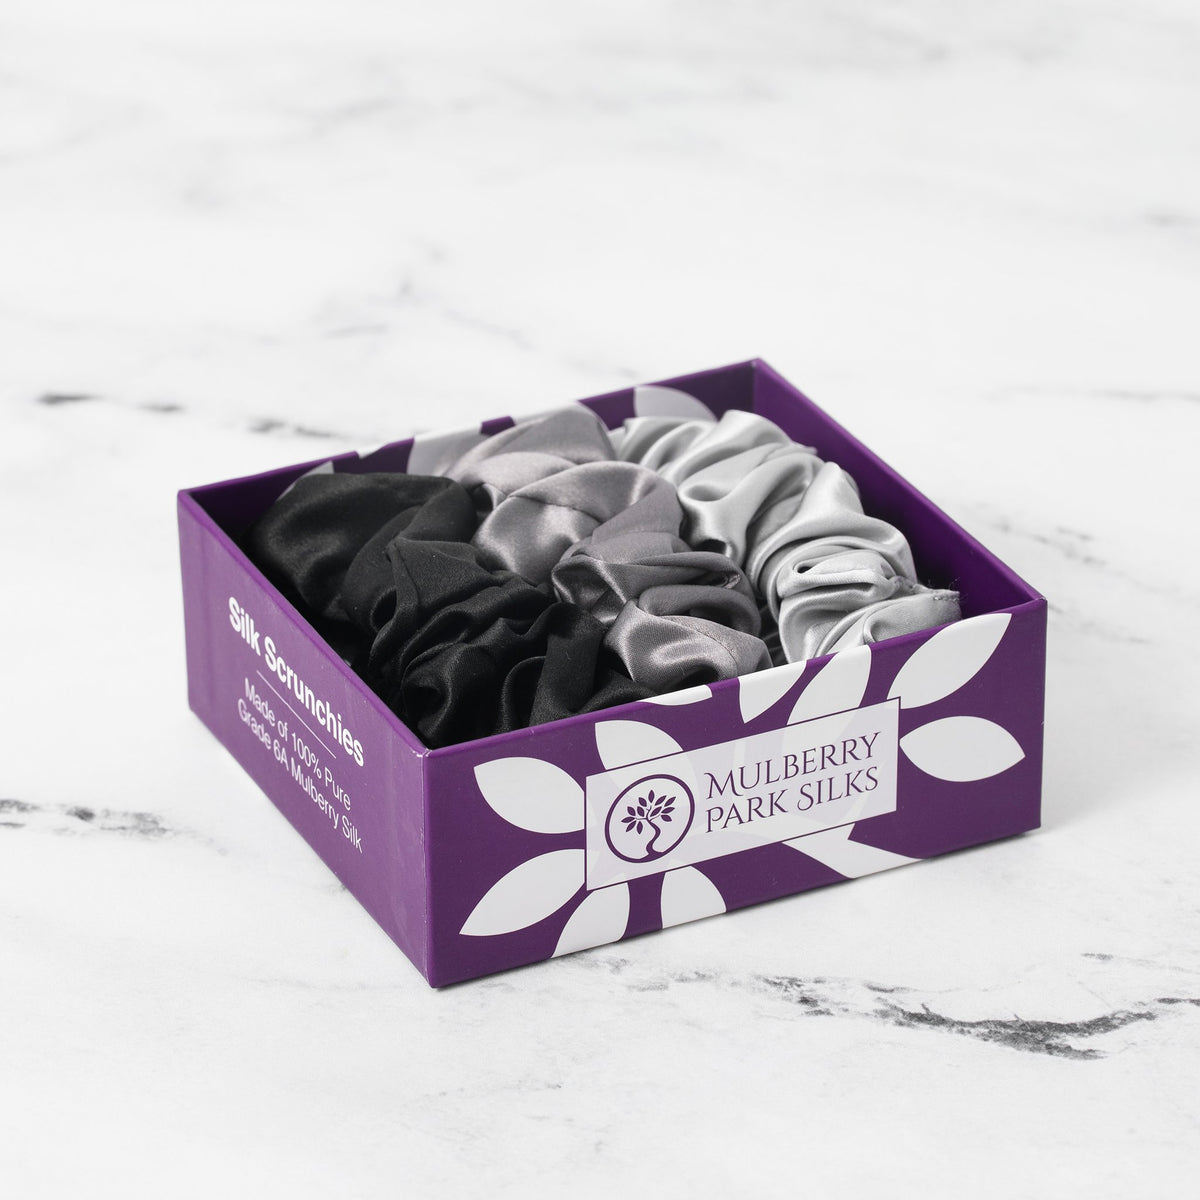 Mulberry Park Silks Silk Scrunchies - Midnight Black, Shimmery Silver, and Gunmetal Grey in Box on Marble